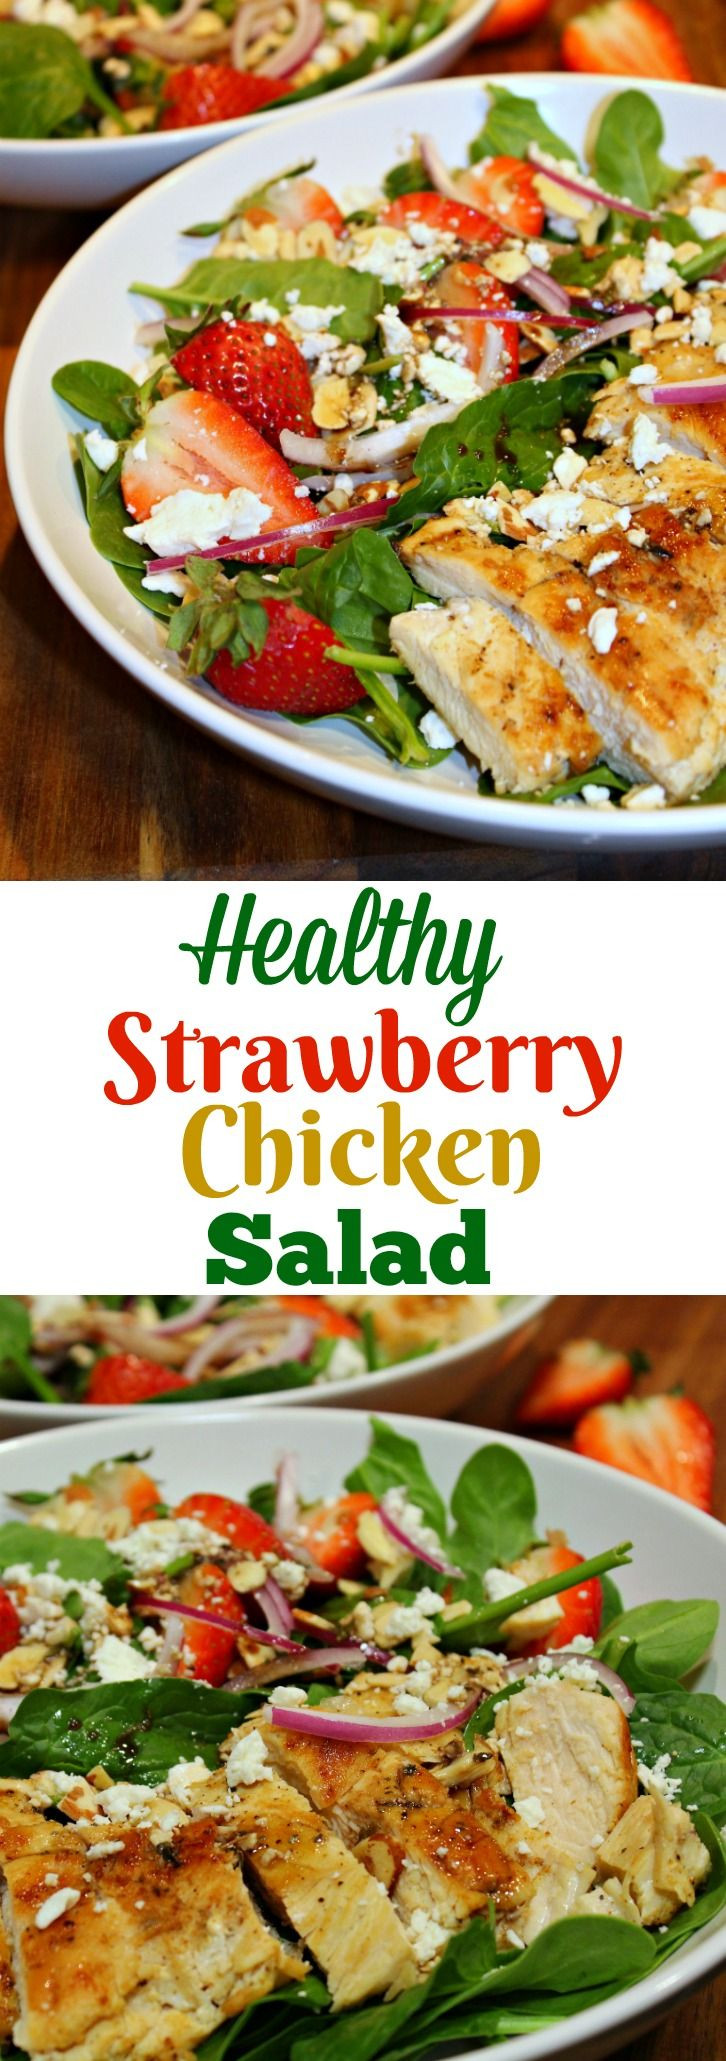 Low Carb Heart Healthy Recipes
 Best 25 Strawberry chicken salads ideas on Pinterest